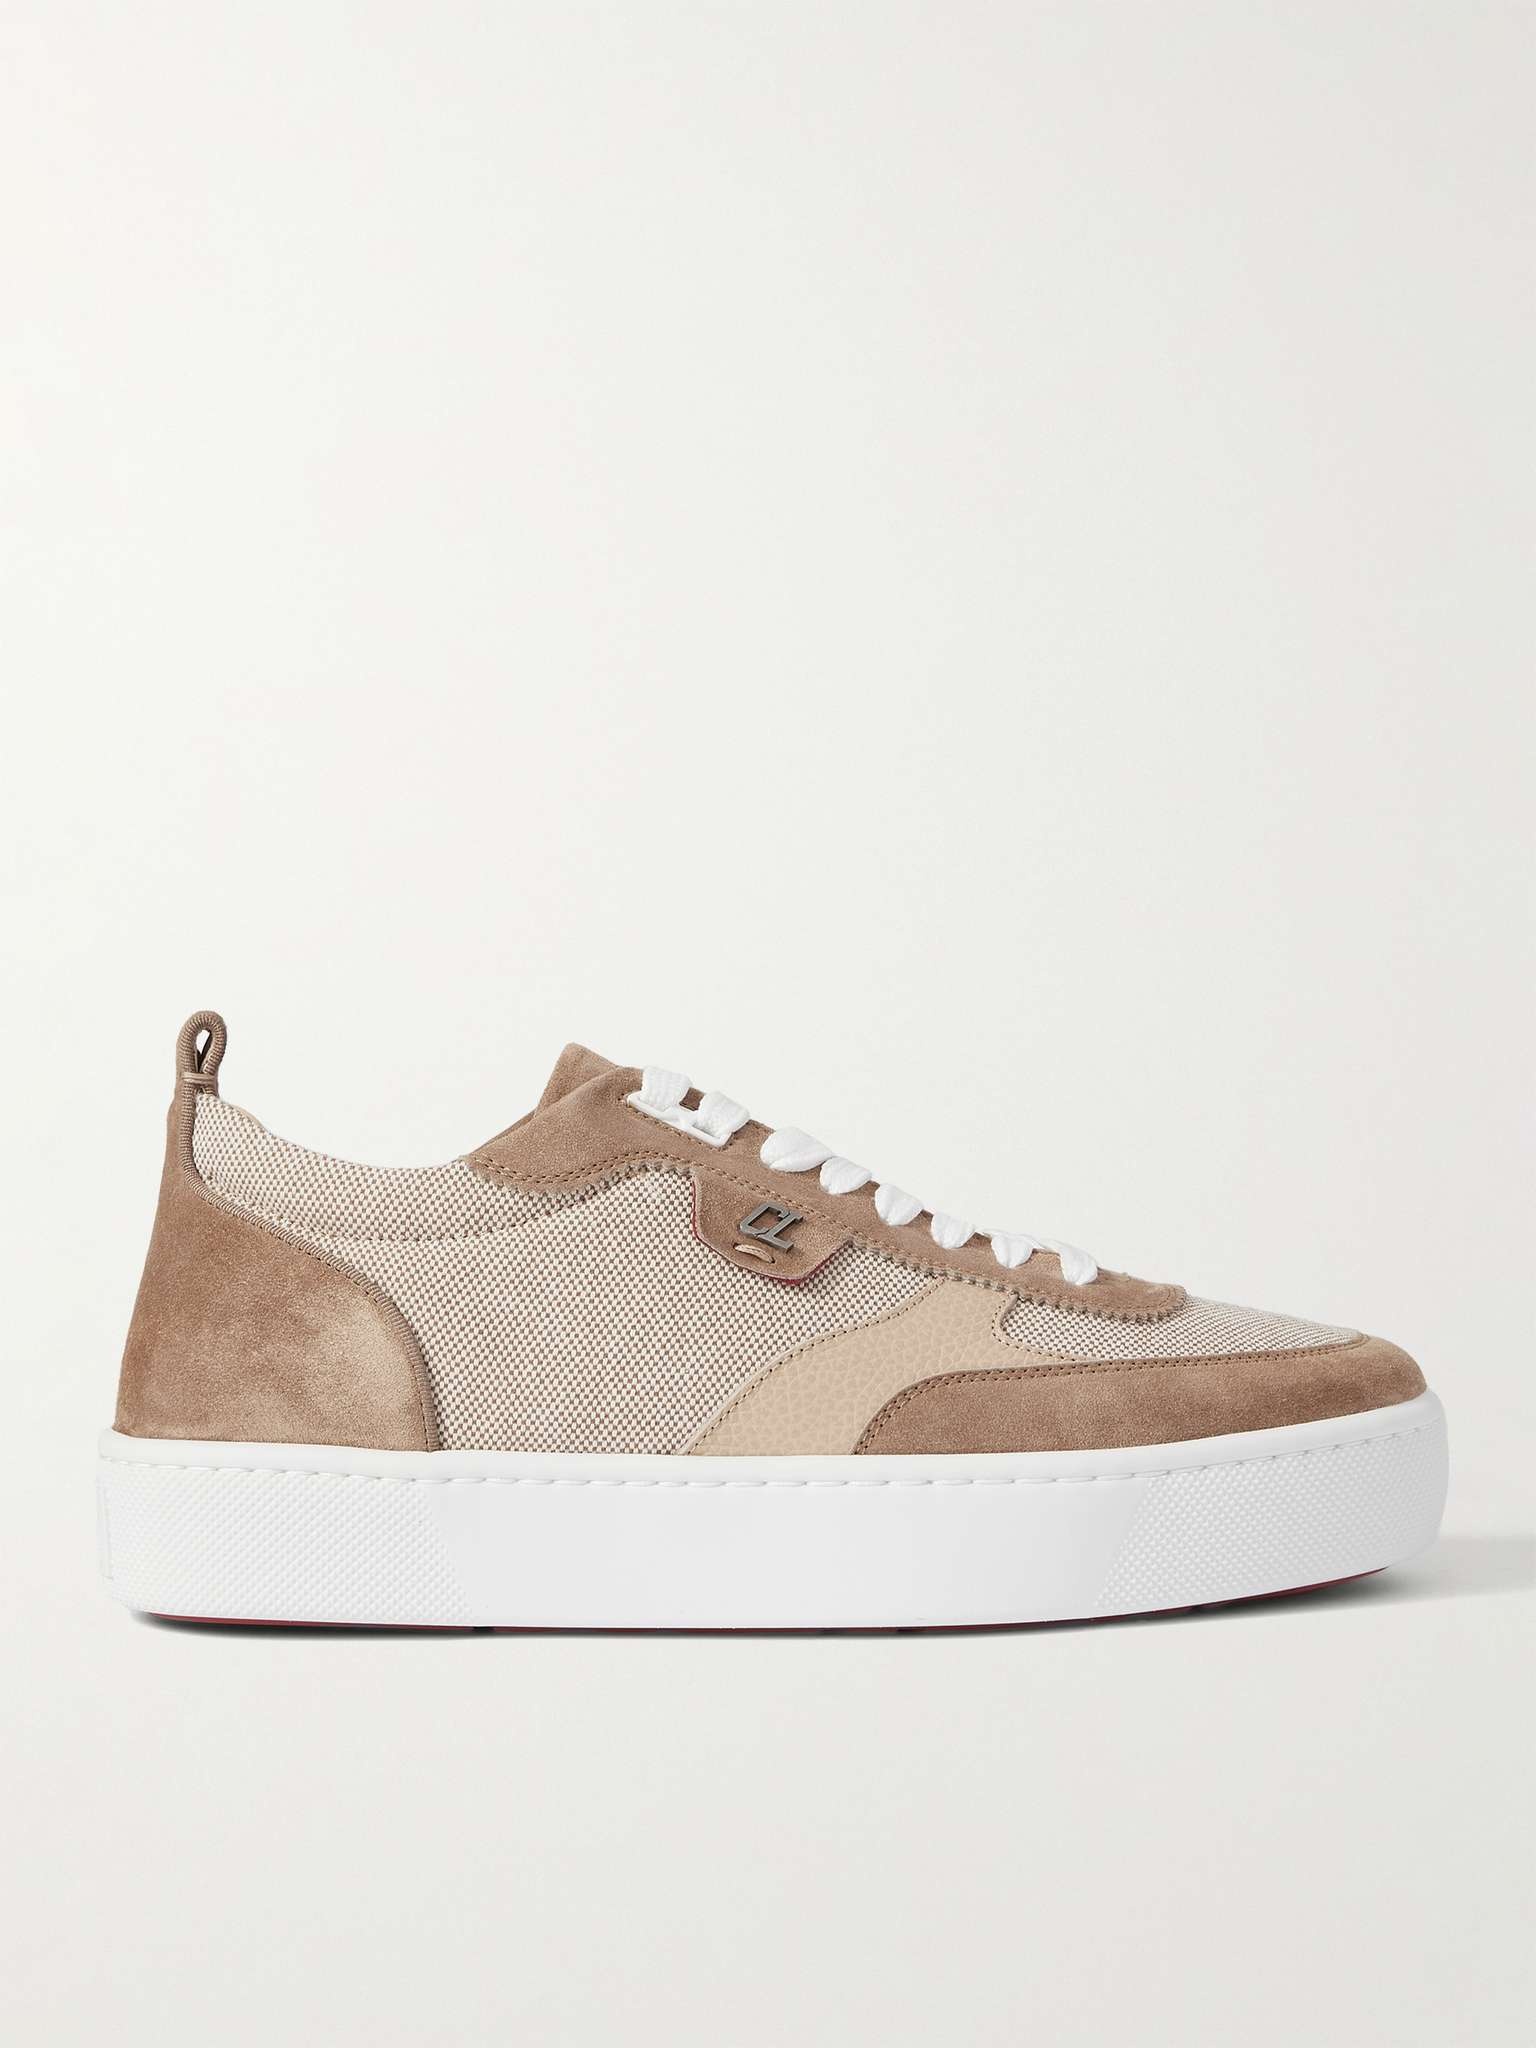 Happyrui Spiked Leather-Trimmed Canvas and Suede Sneakers - 1